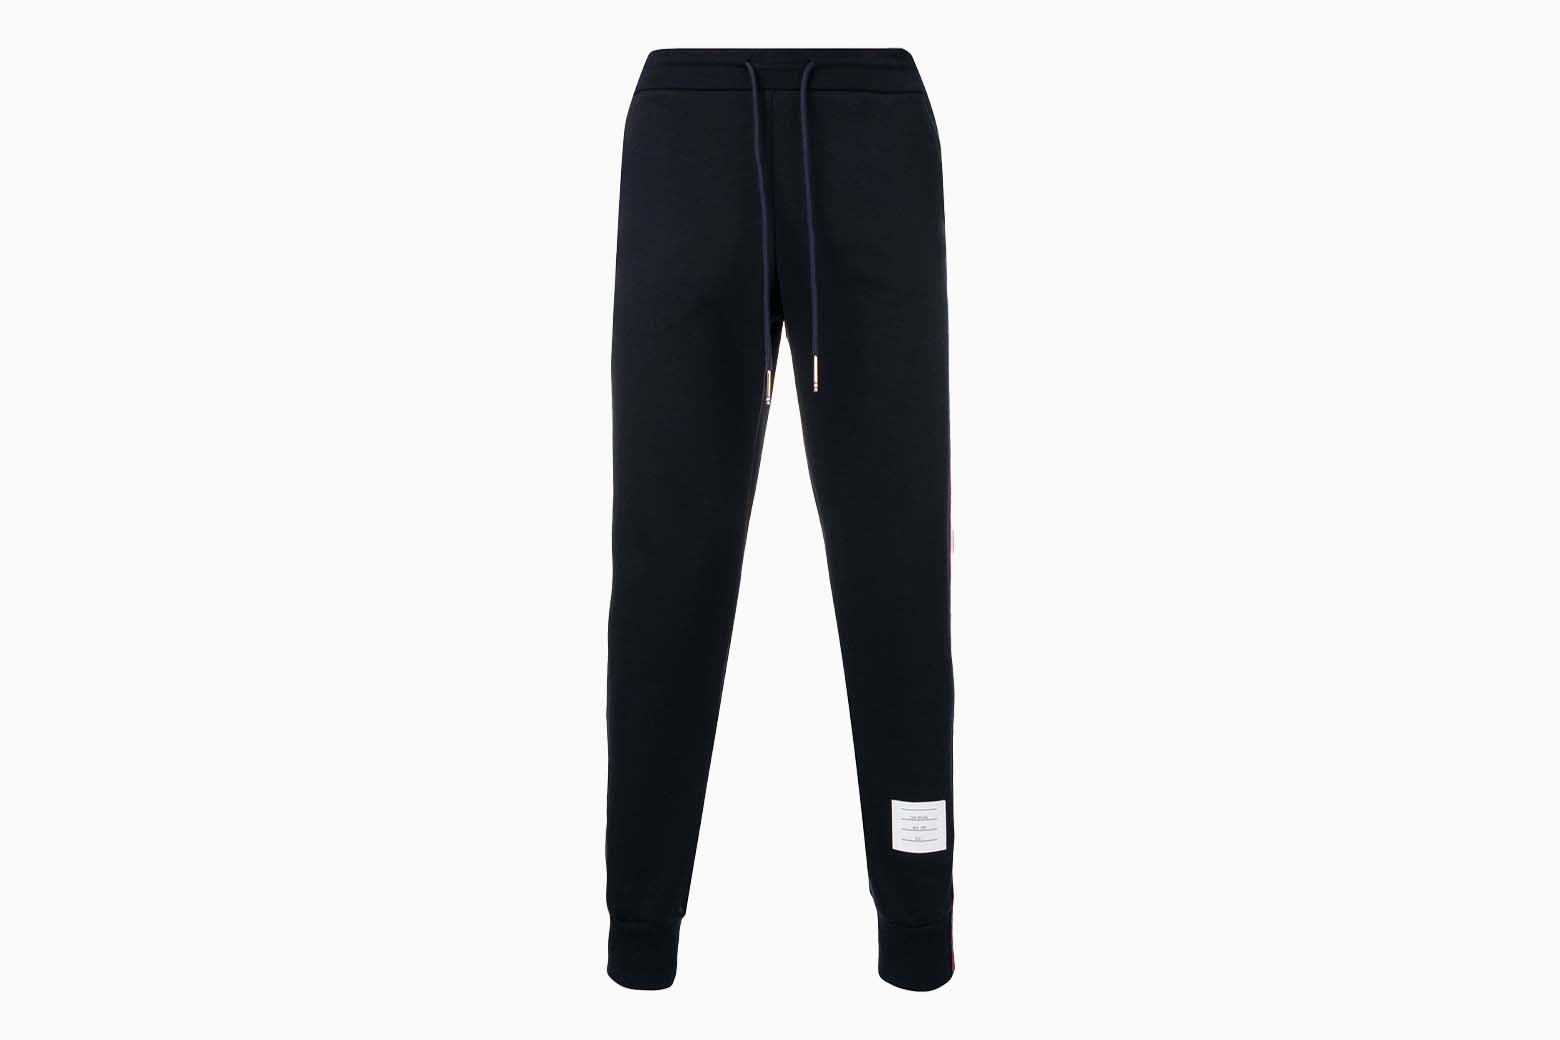 21 Best Joggers For Men That Are Stylish And Comfortable